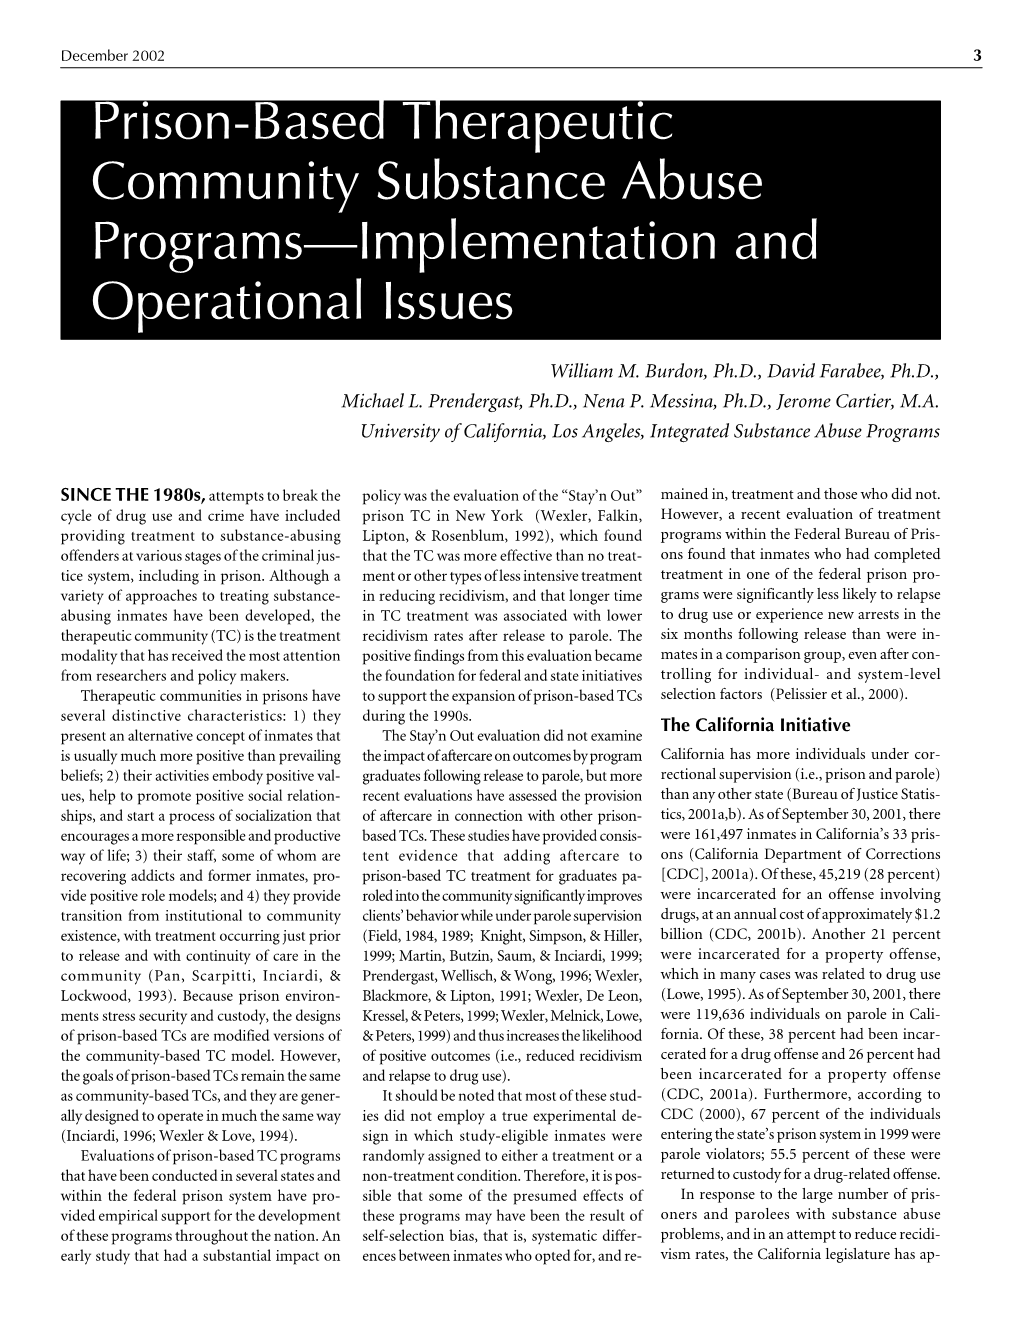 Prison-Based Therapeutic Community Substance Abuse Programs—Implementation and Operational Issues